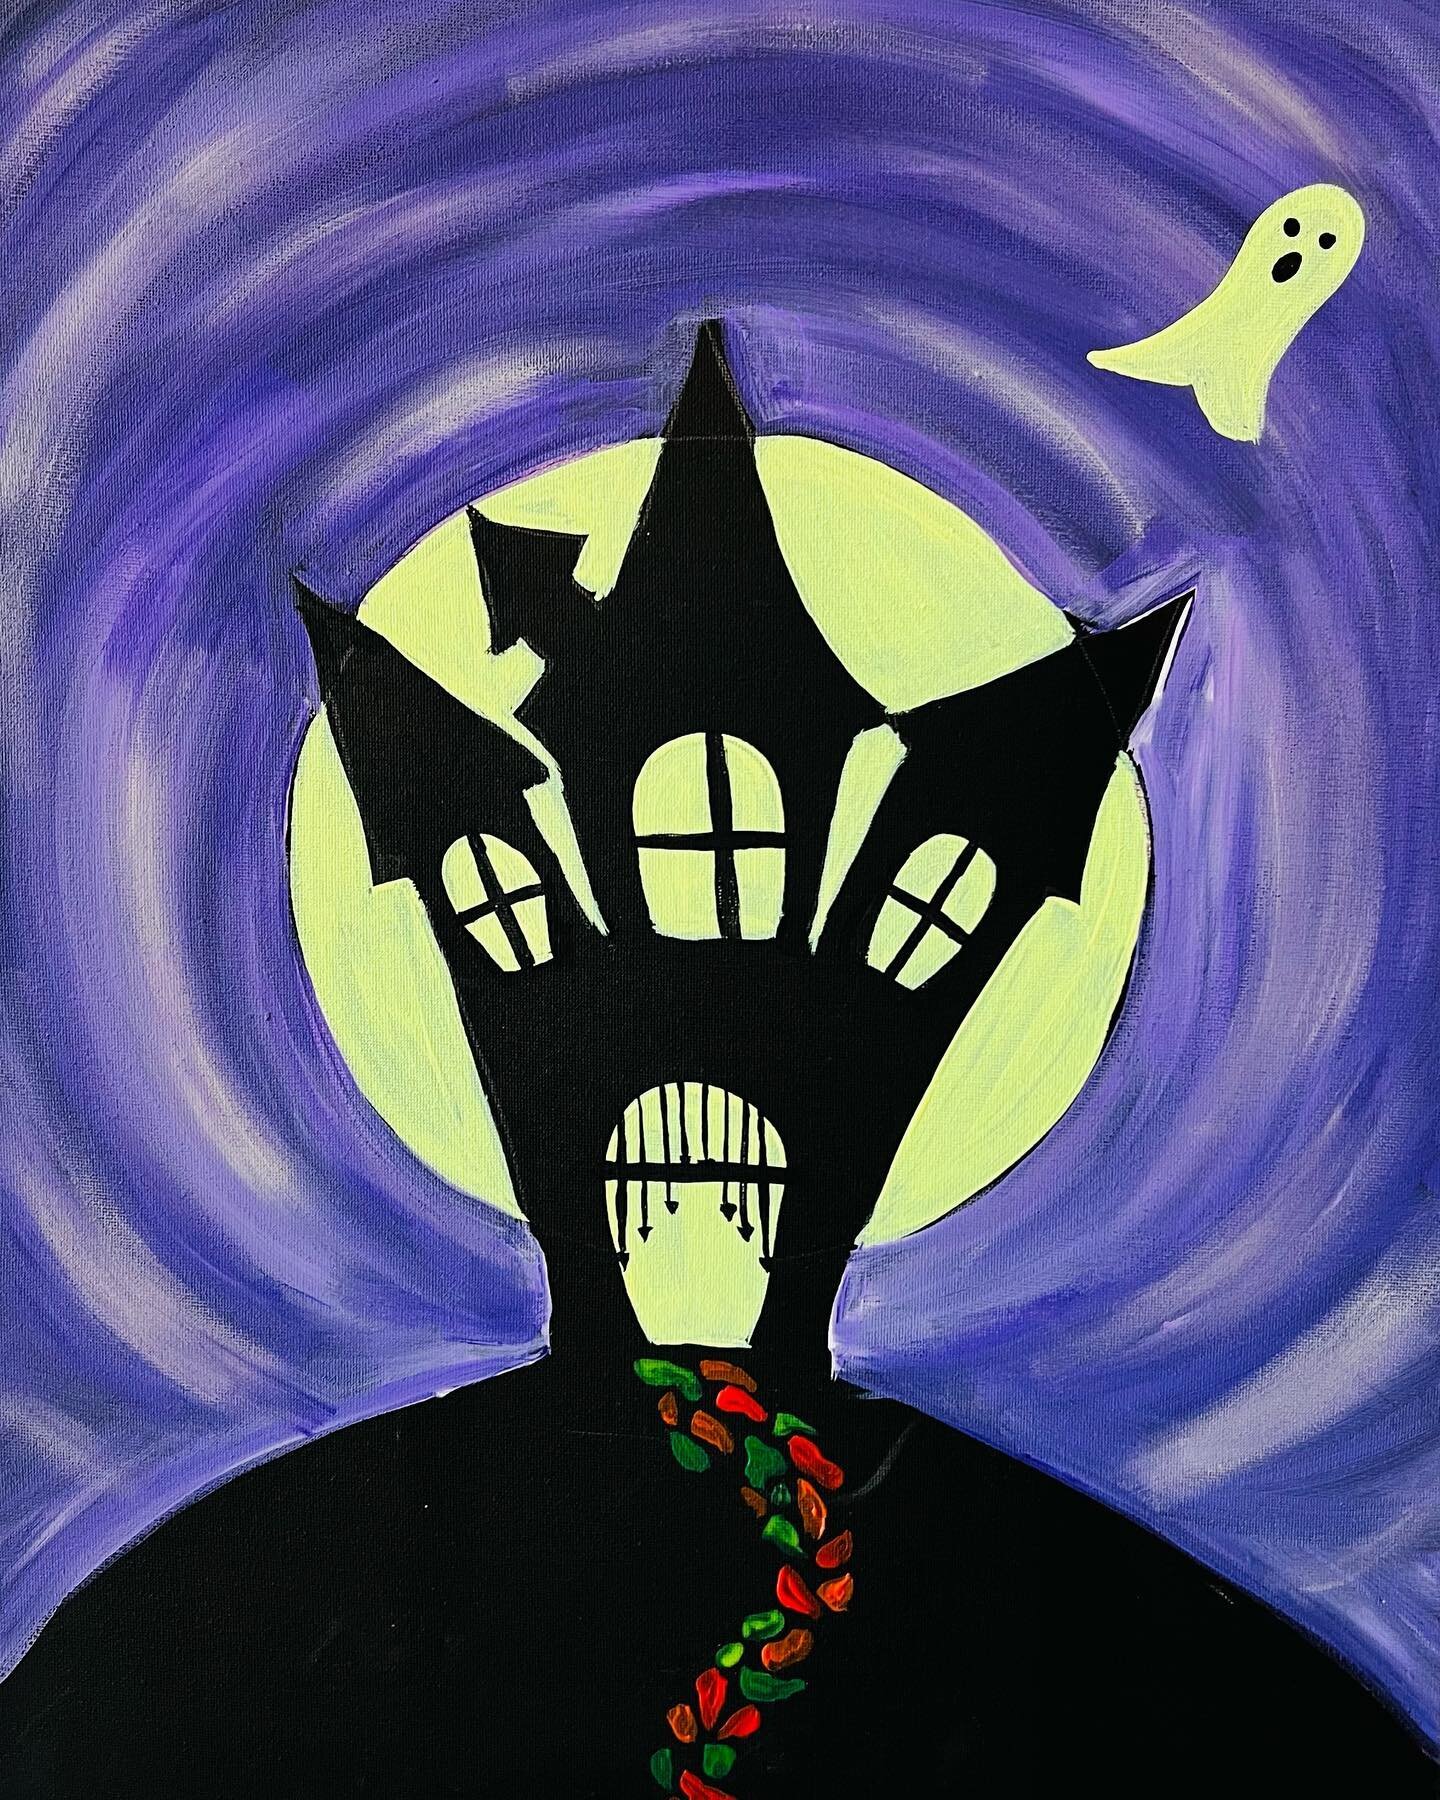 We&rsquo;re so excited to announce that we&rsquo;ve got a twist on our first Halloween painting of October!! We&rsquo;ll not only be painting this spooky, glow n the dark picture but we&rsquo;ll be projecting the movie &lsquo;The Haunted Mansion&rsqu